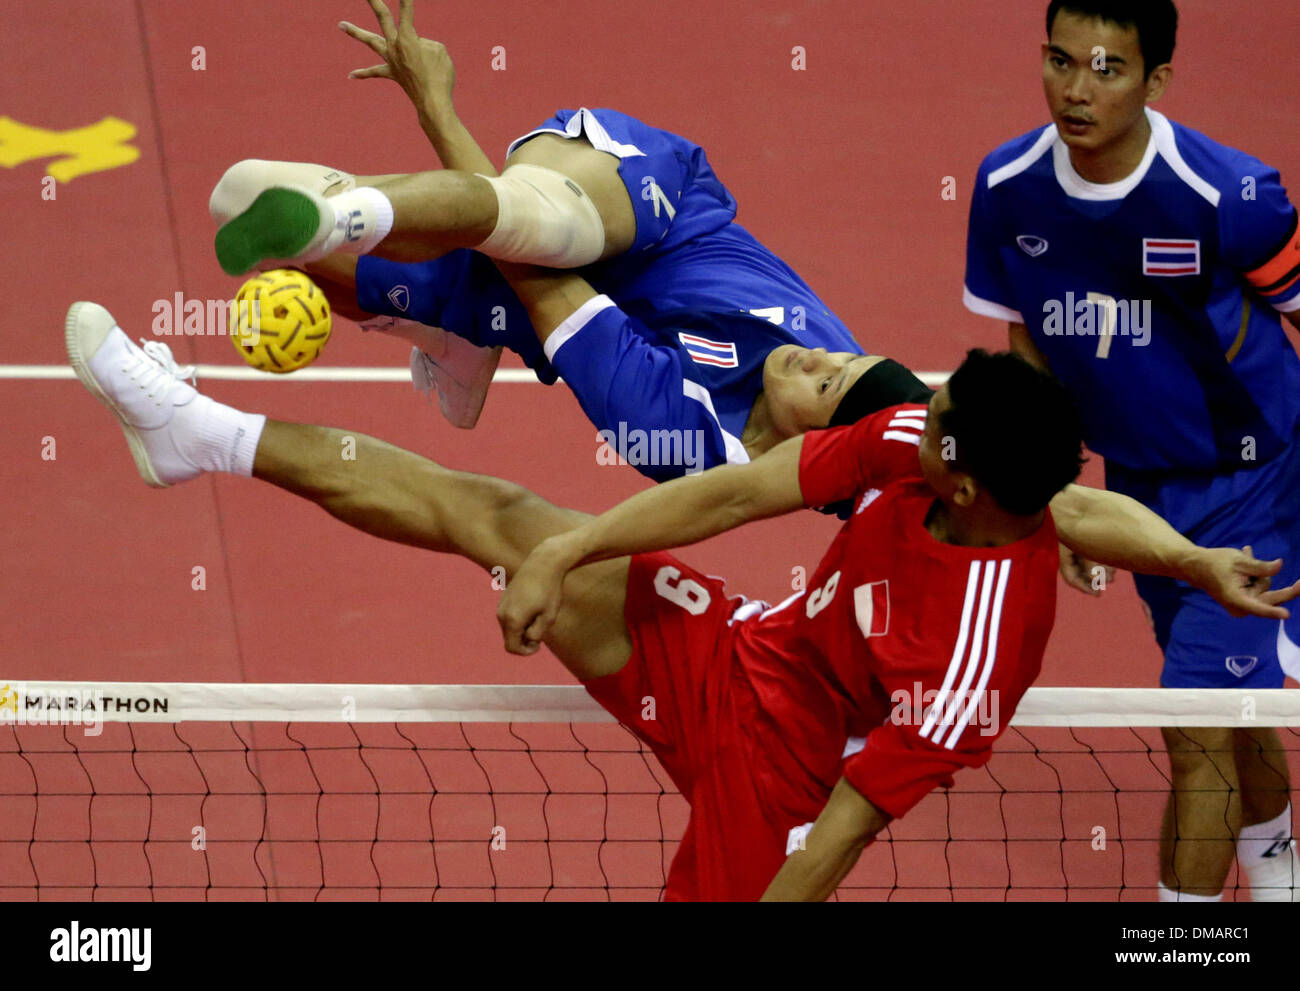 Nay Pyi Taw, Myanmar. 13th Dec, 2013. A player of Indonesia (front) tries to block during the men's Sepak Takraw match between Thailand and Indonesia in the 27th Southeast Asian (SEA) Games in Nay Pyi Taw, Myanmar, Dec. 12, 2013. © U Aung/Xinhua/Alamy Live News Stock Photo